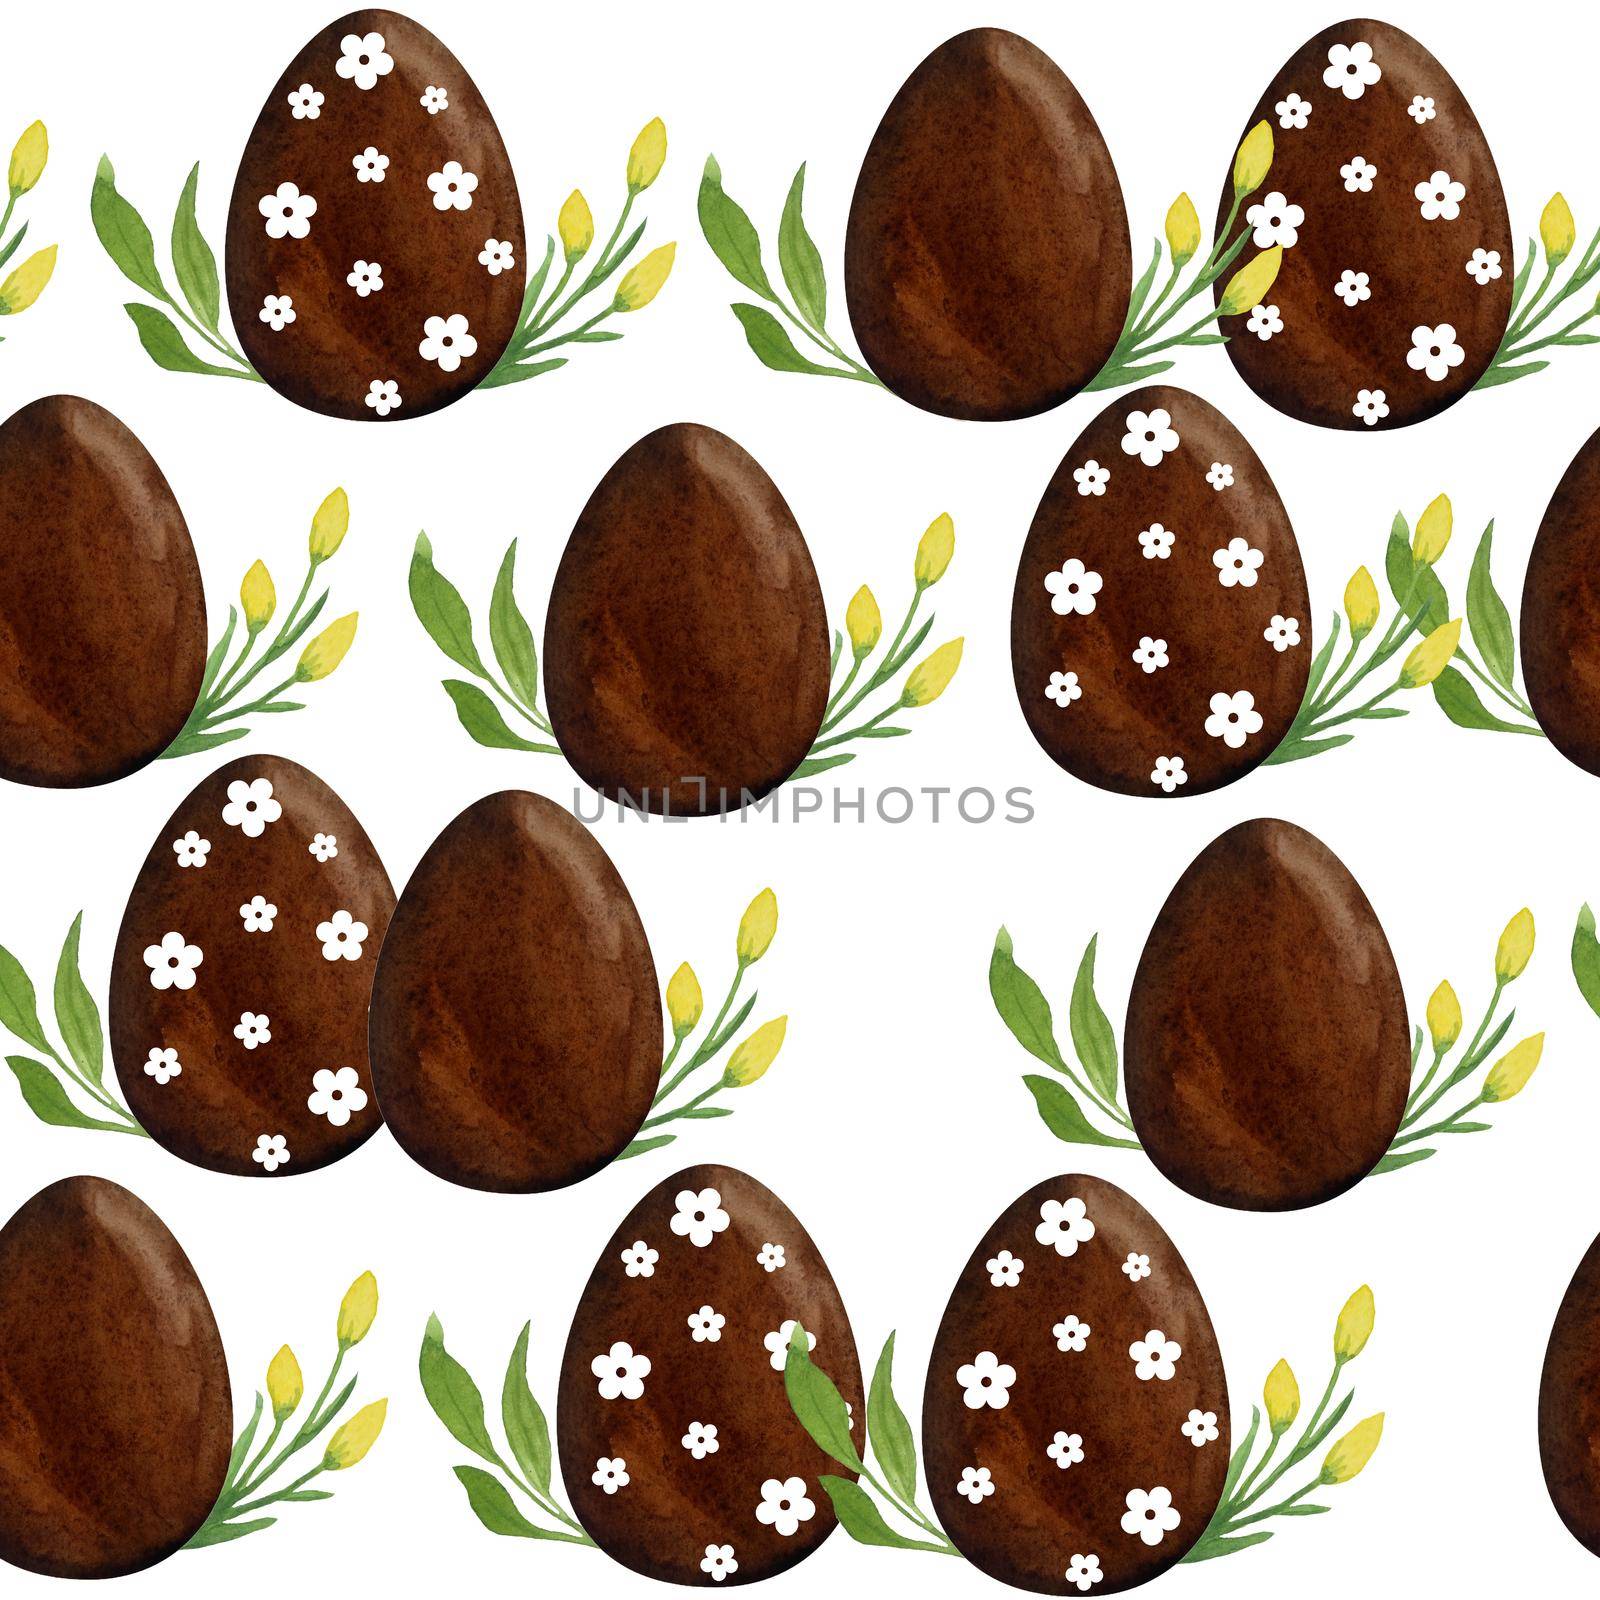 Watercolor seamless pattern with chocolate Easter eggs grass buttercup flowers and leaves. Easter hunt celebration brown design. Spring season background with religious Christian symbols